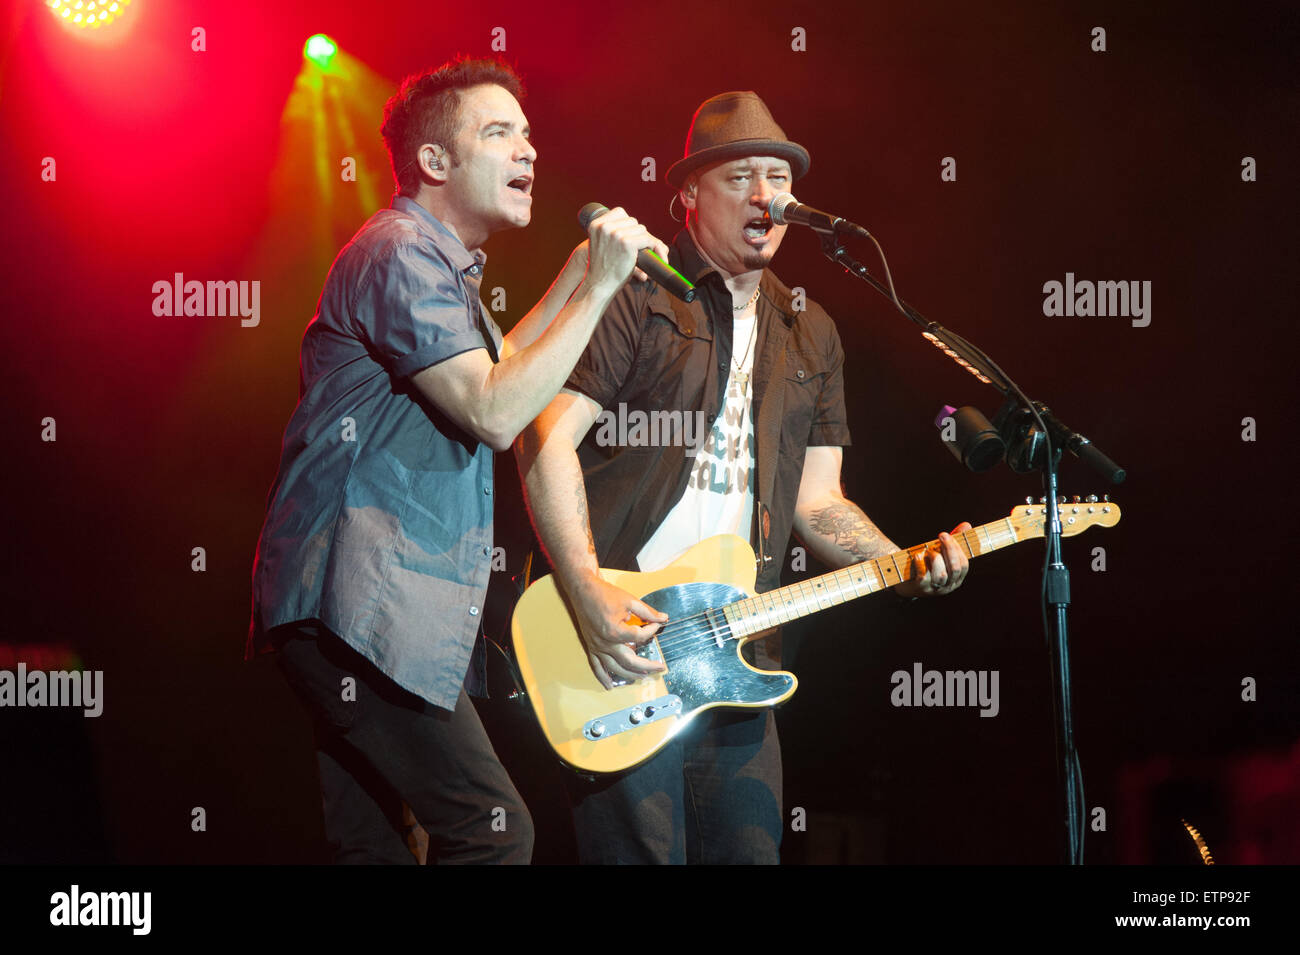 Camden, New Jersey, USA. 14th June, 2015. PAT MONAHAN, lead singer of the band TRAIN, and JIMMY STAFFORD of TRAIN, performing at the Susquehanna Bank Center as part of the Picasso at the Wheel Tour Credit:  Ricky Fitchett/ZUMA Wire/Alamy Live News Stock Photo